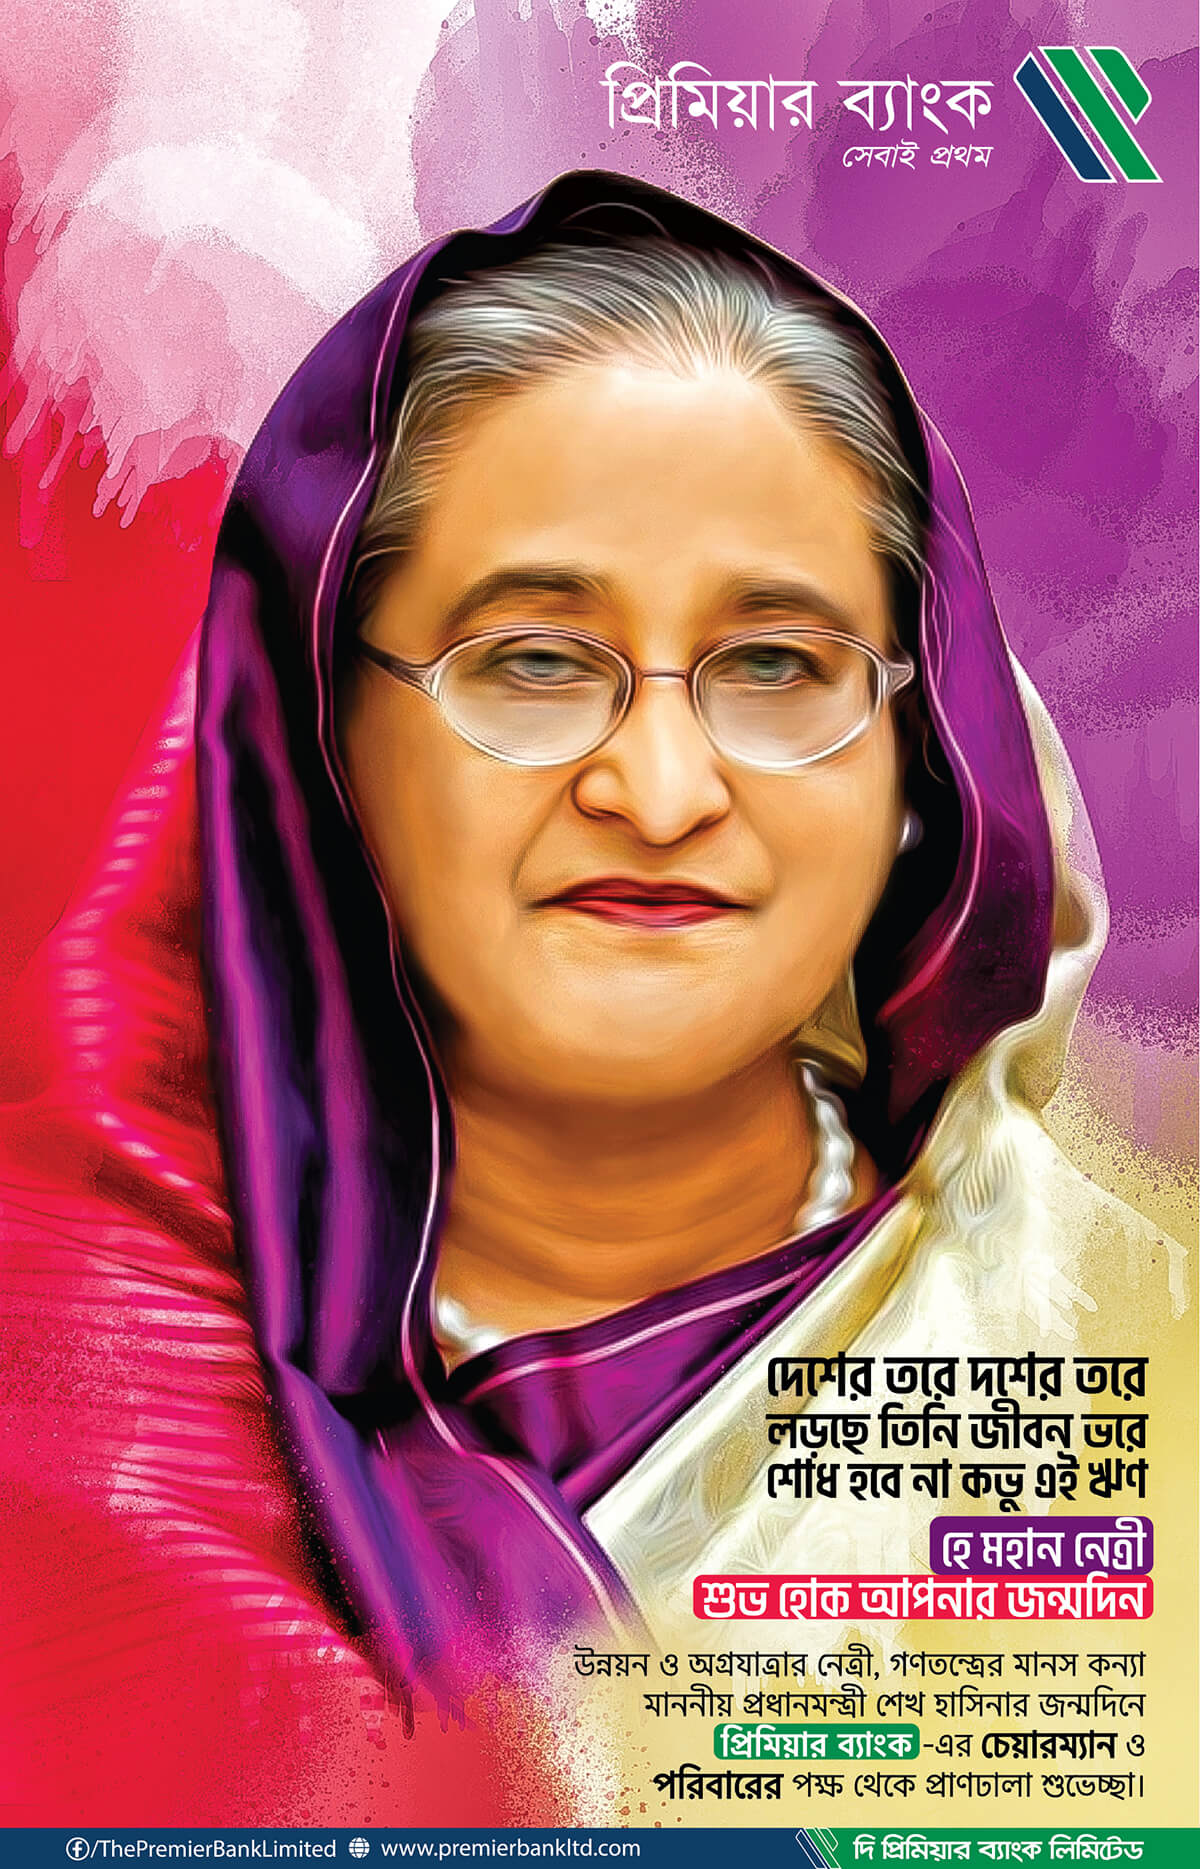 Birthday Greeting of our Honorable Prime Minister Sheikh Hasina